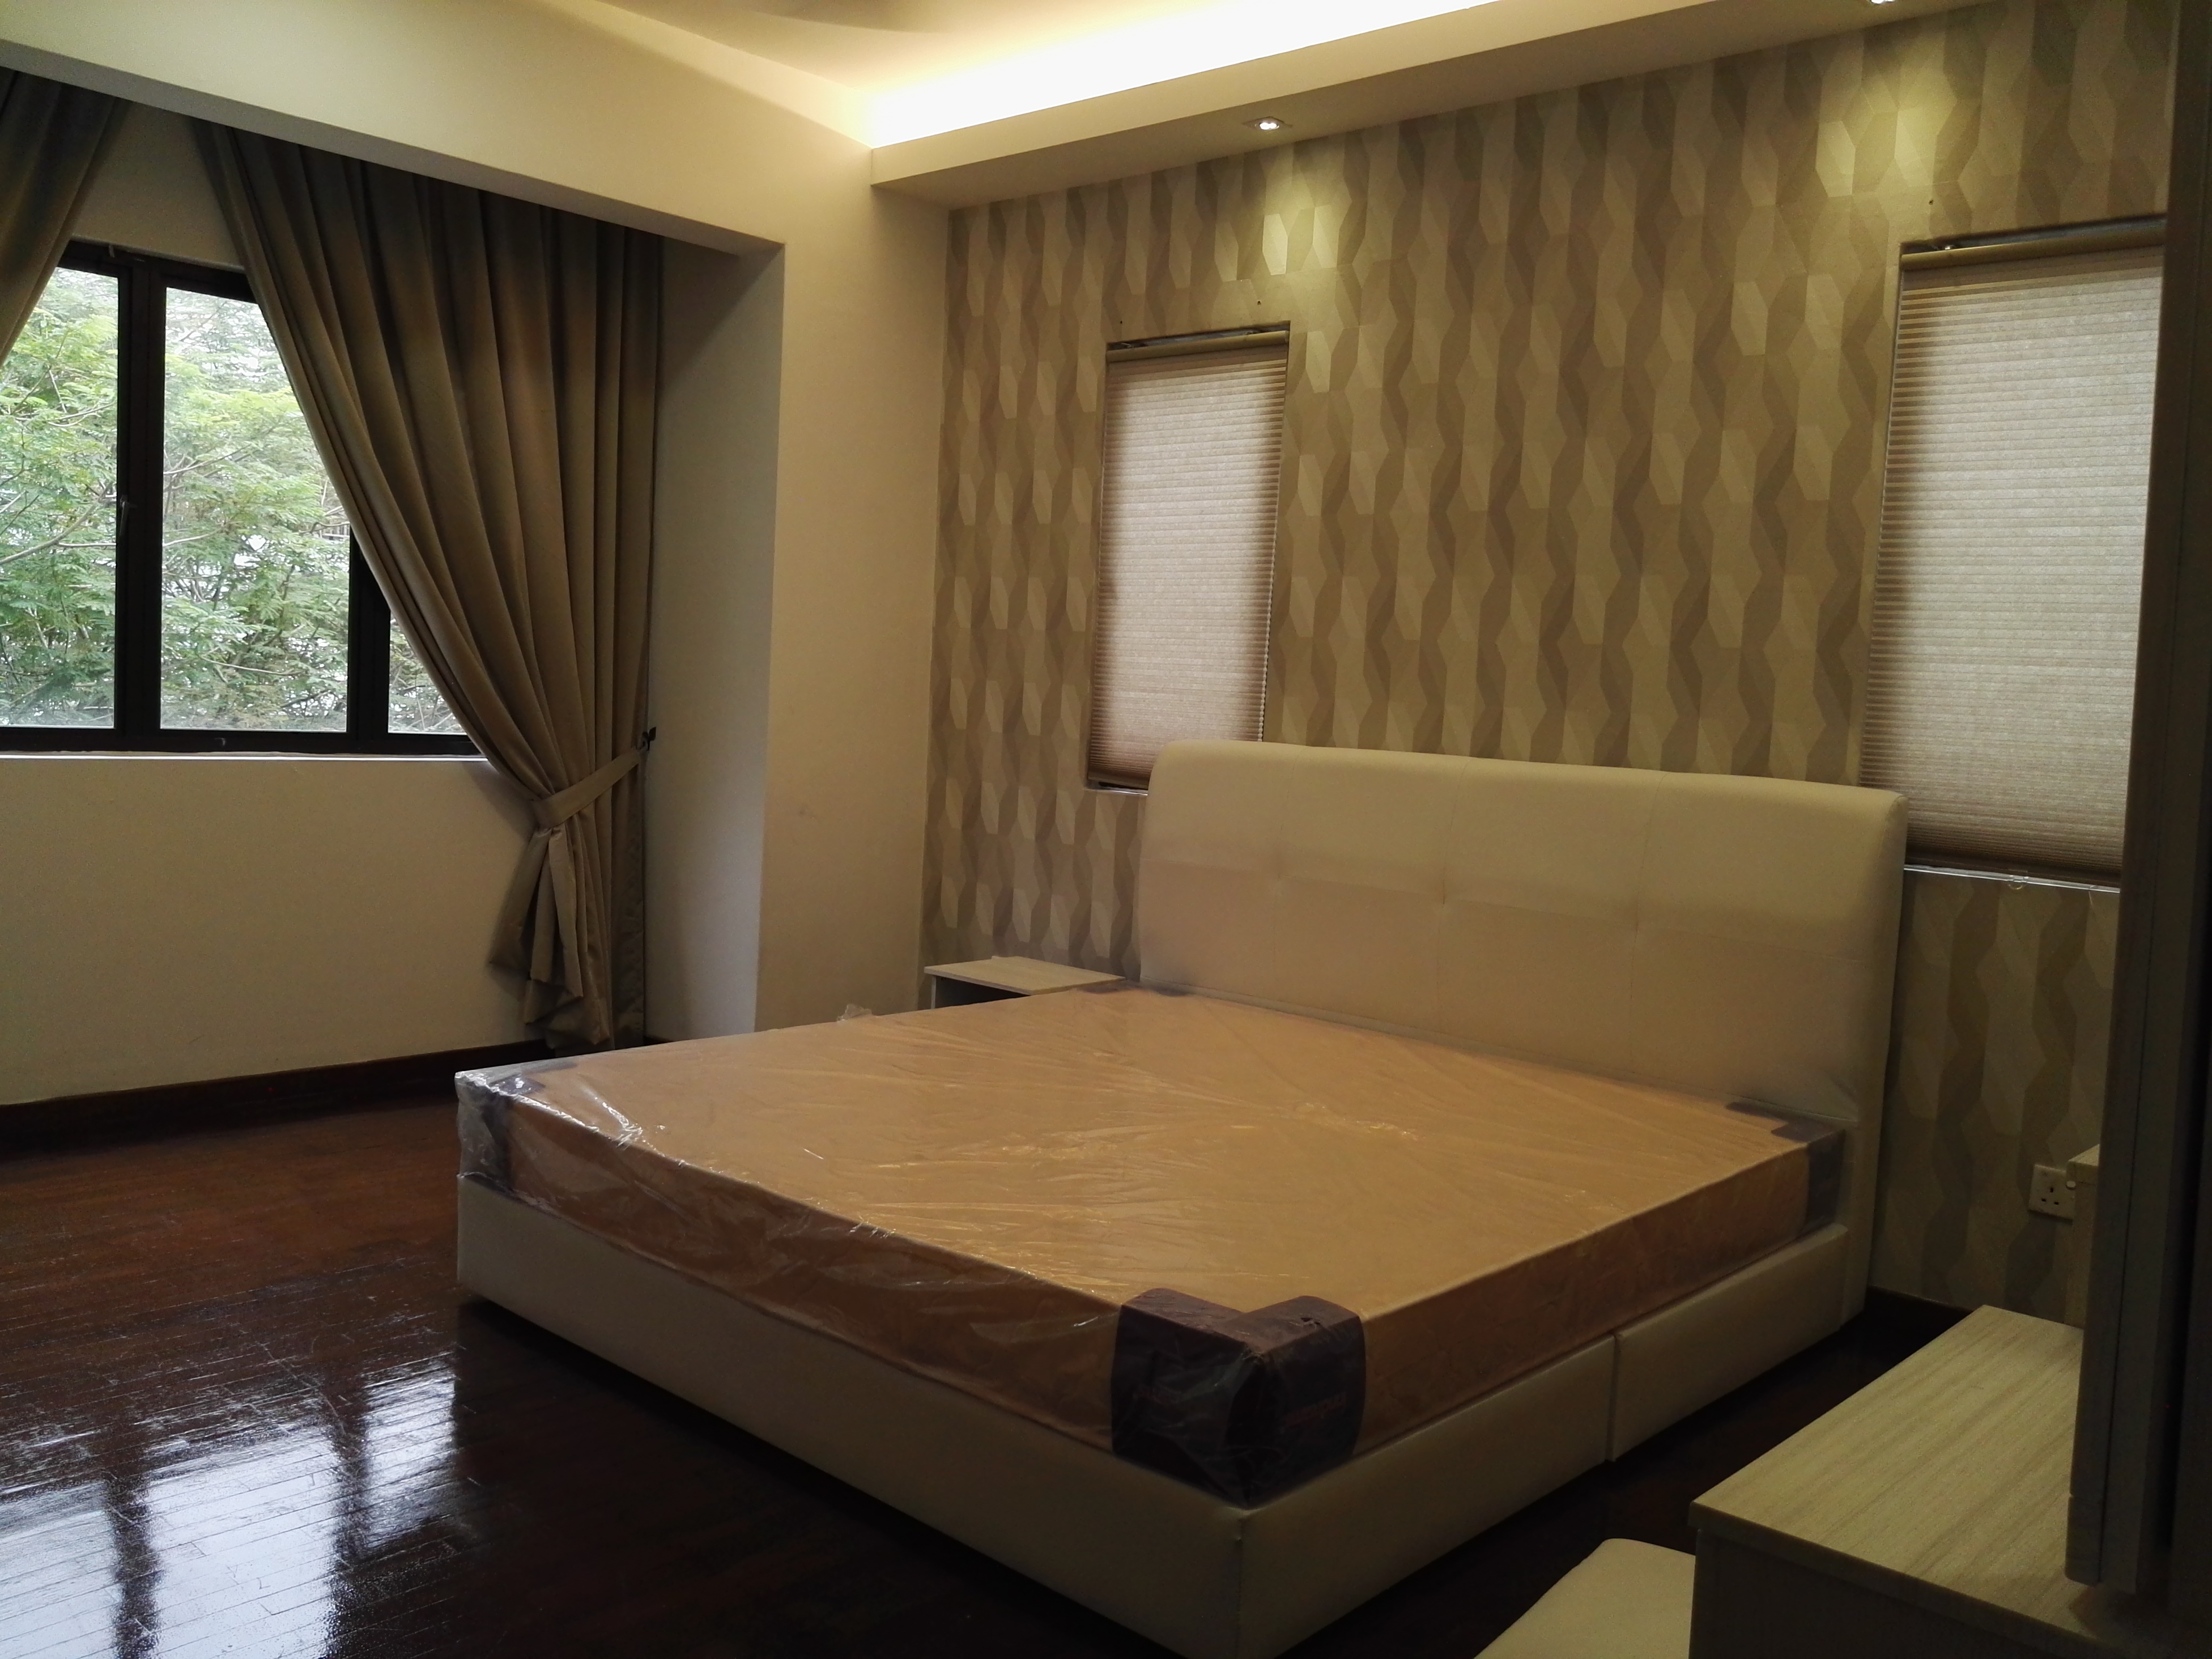 Room Plus CHSE113R1 Private Room with King Bed